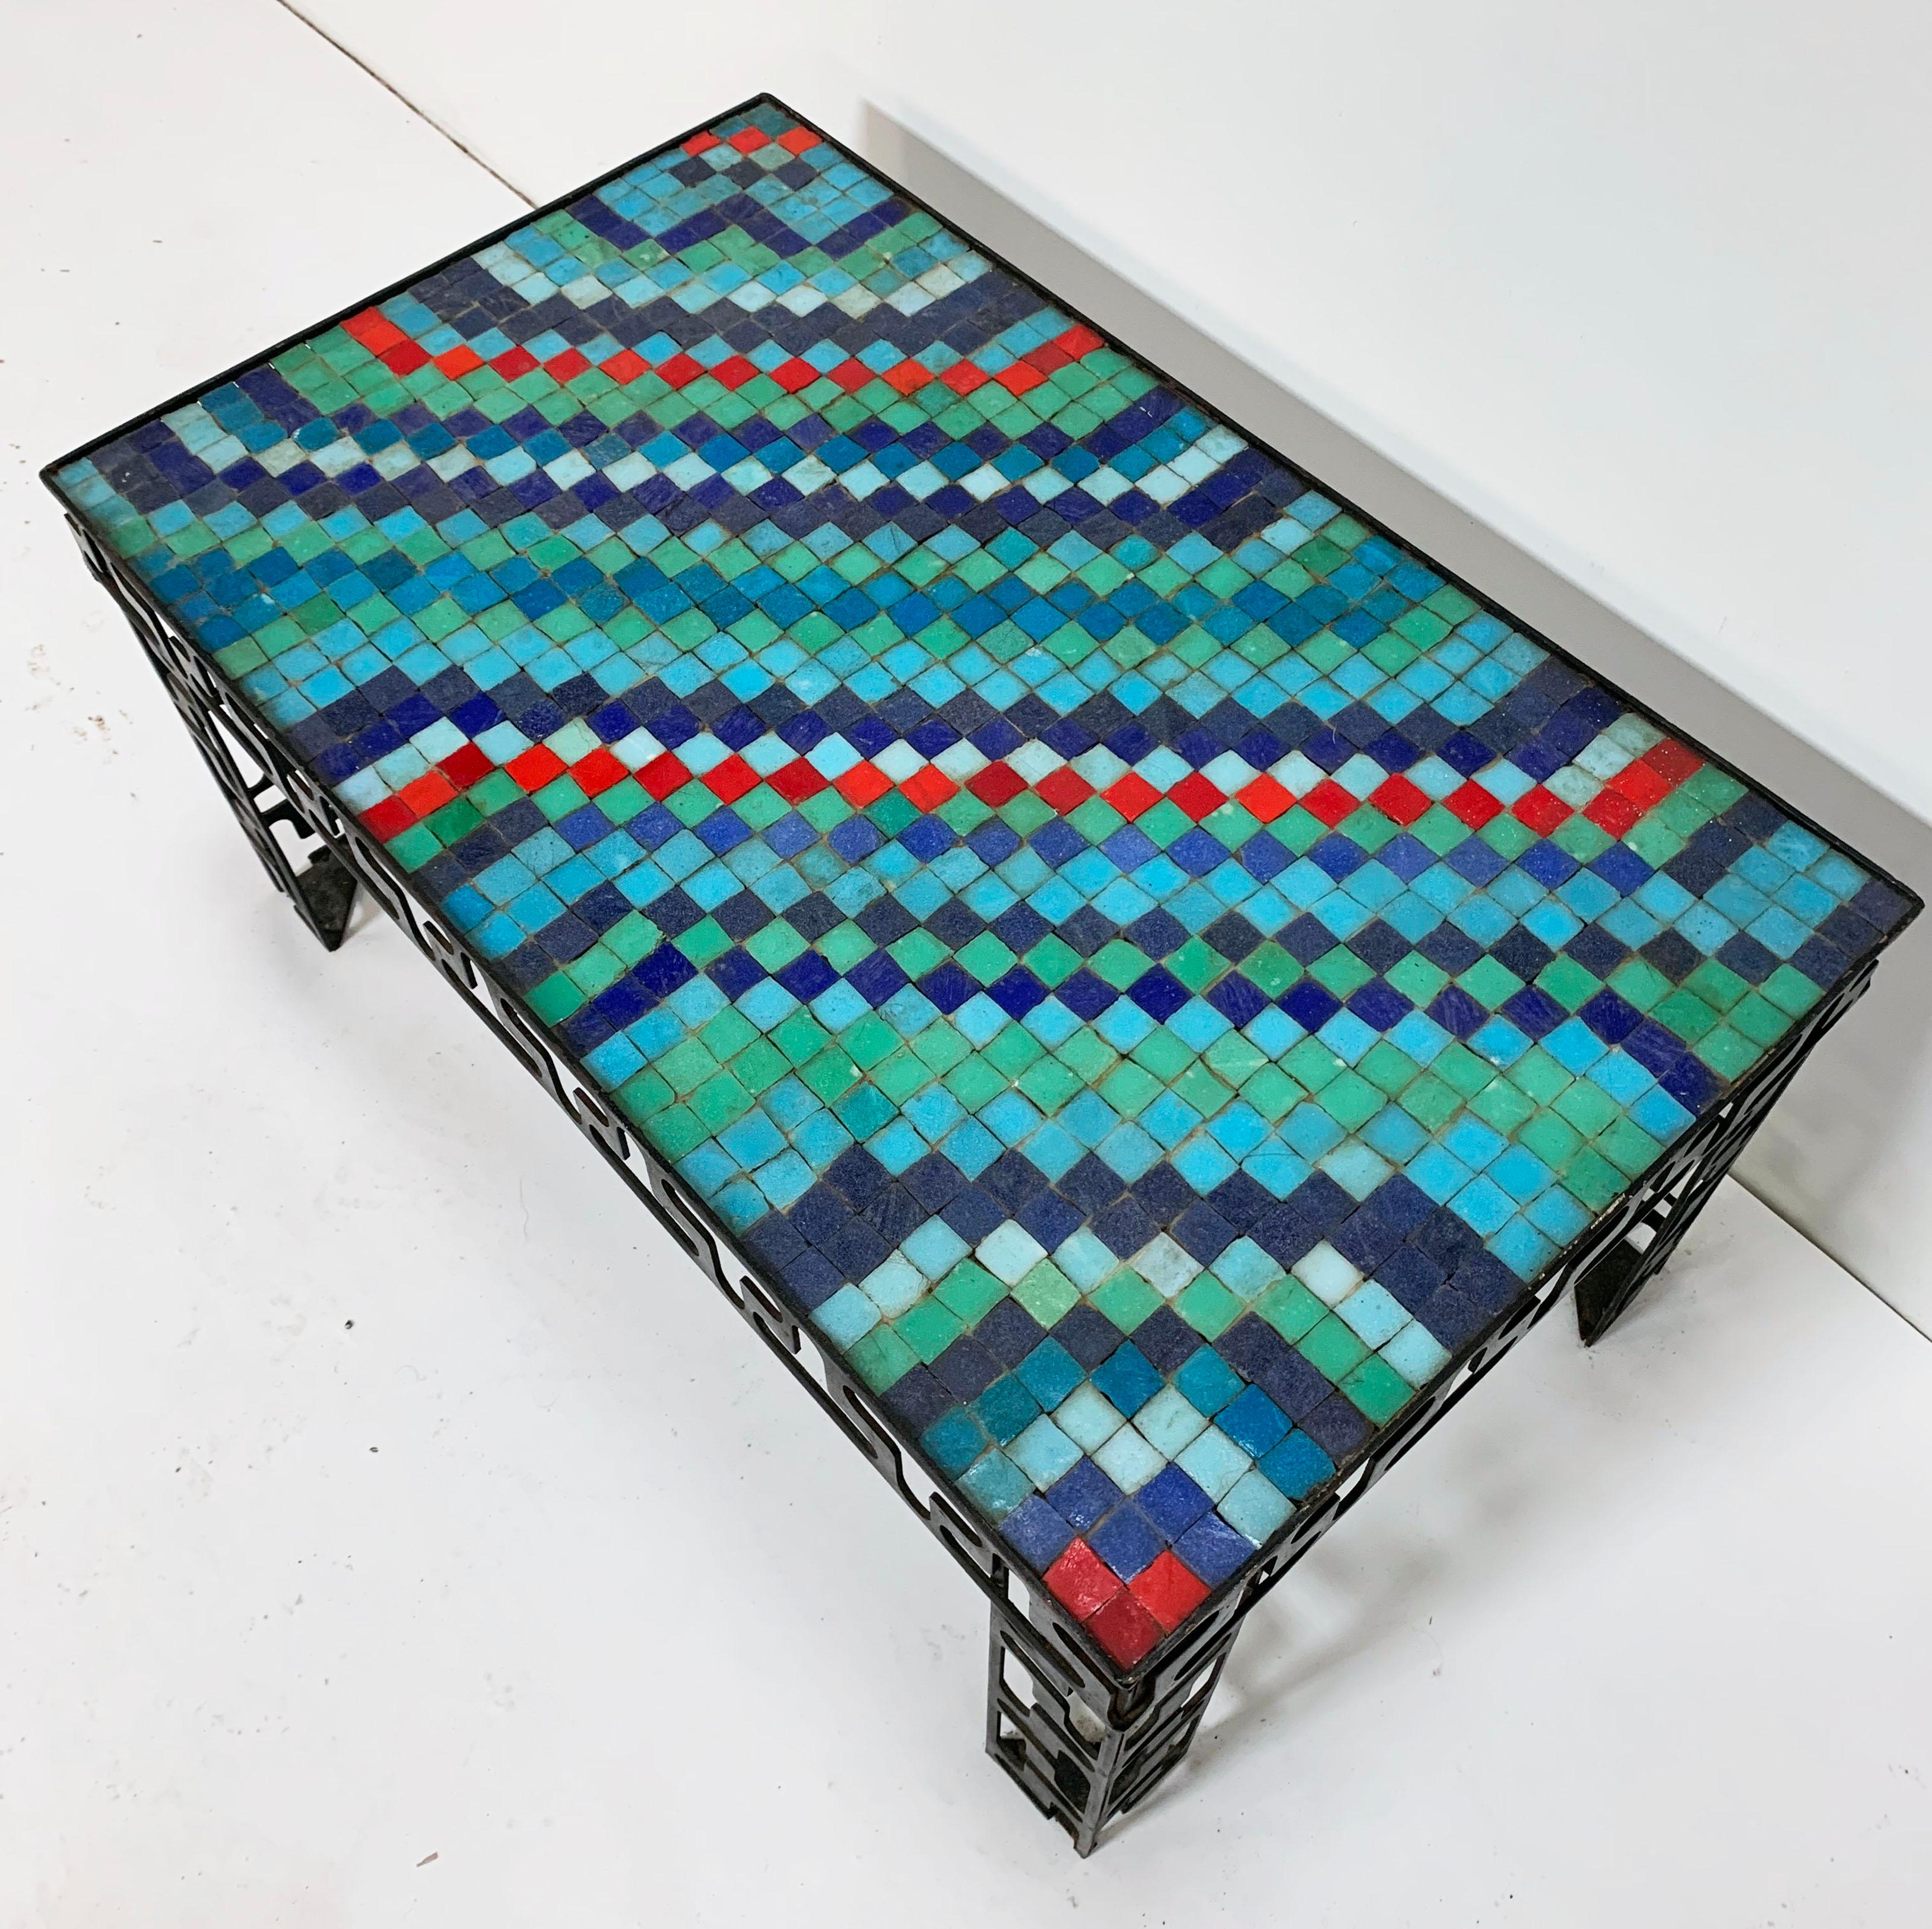 Unique artist made table of welded steel punch-cut blanks with a dazzling Murano glass tile mosaic, circa 1970s.